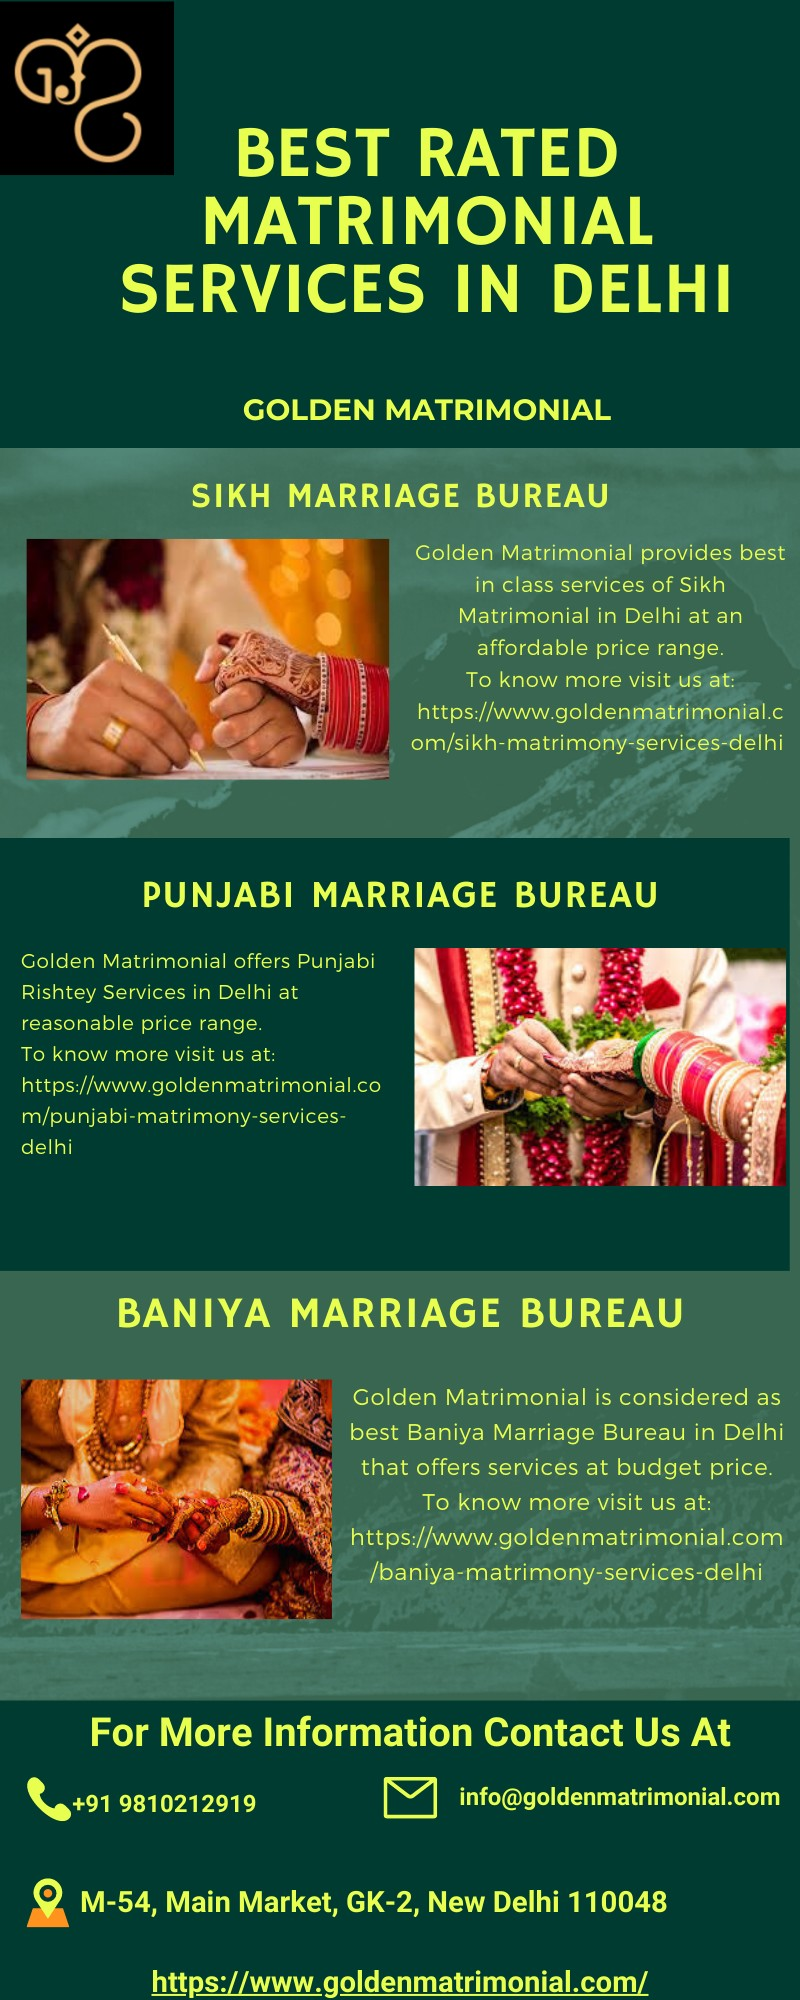 Best Rated Matrimonial Services in Delhi